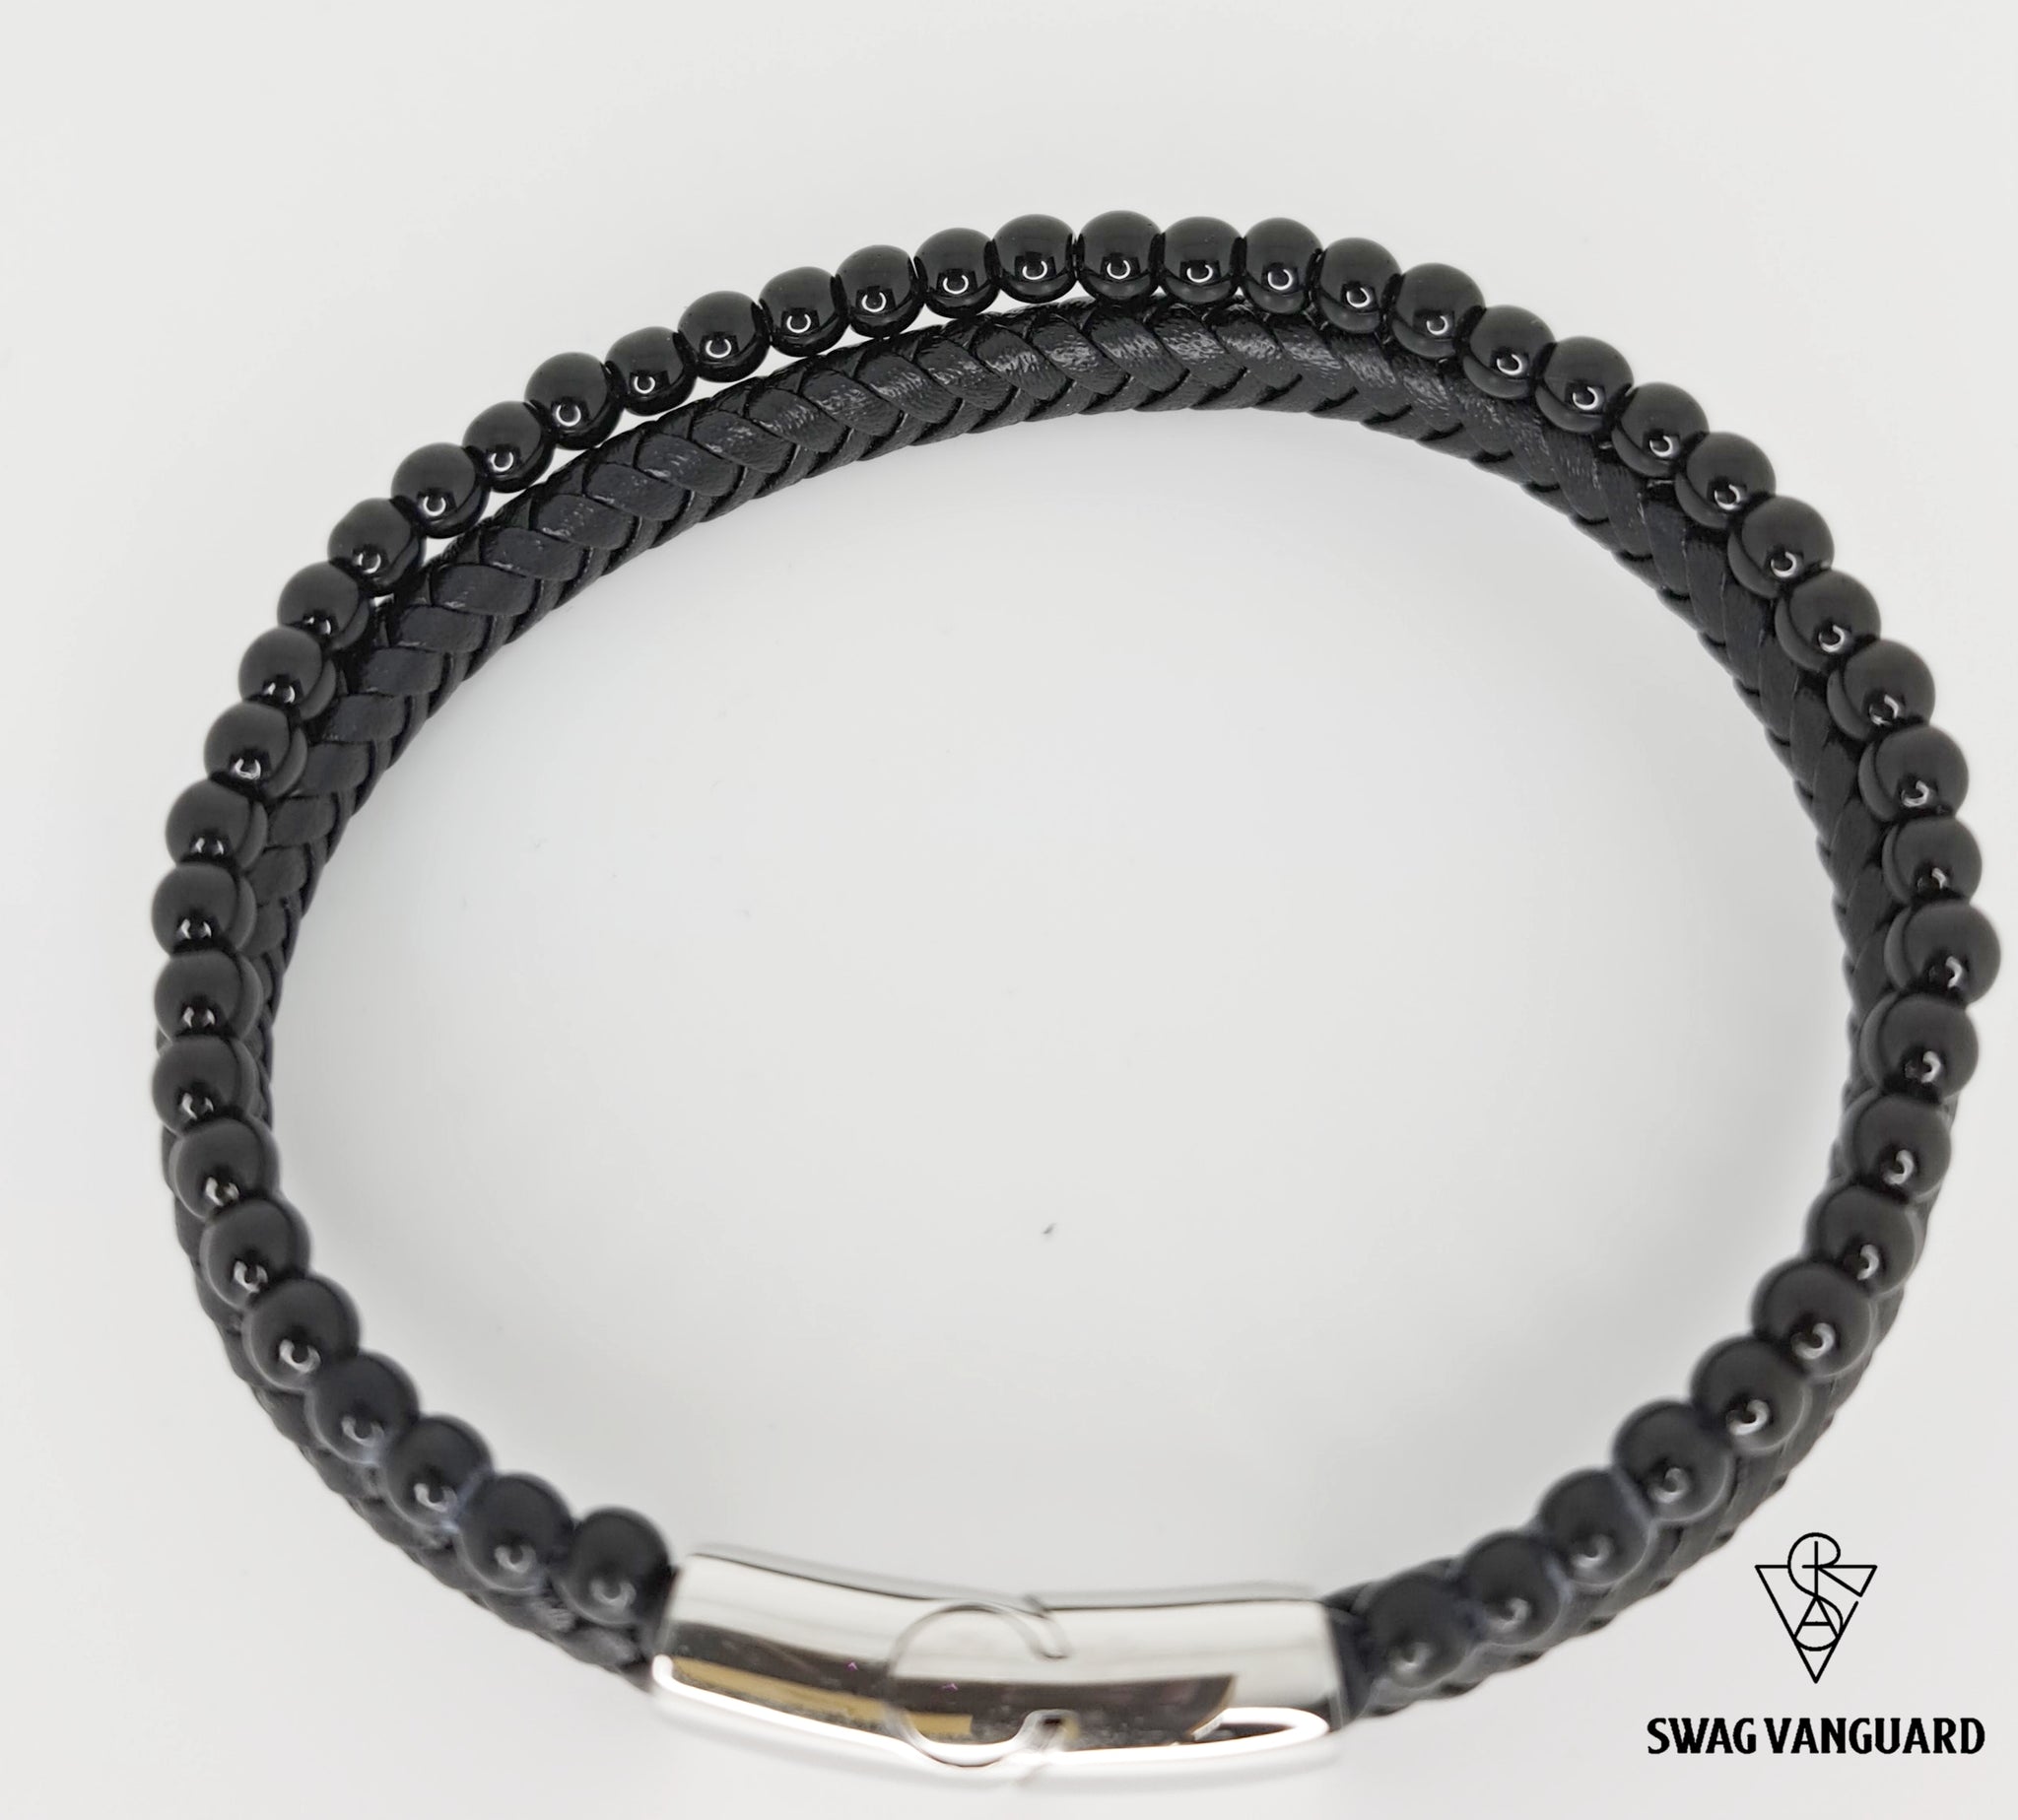 Stainless Steel Clasps, Black Braided Calf Leather and 4mm Black Beads